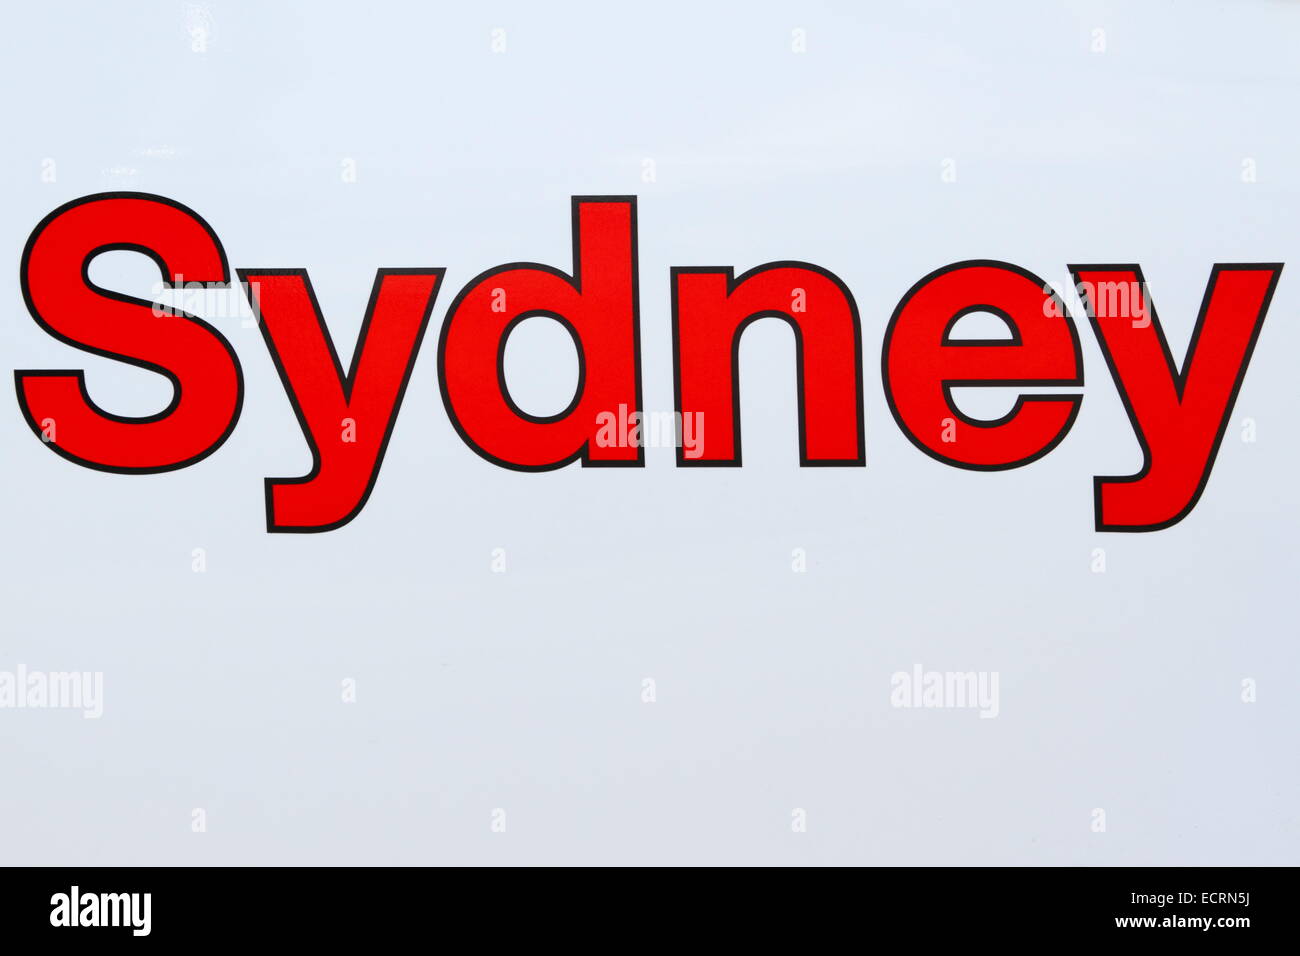 A sign with red letters for Sydney, Australia. Stock Photo